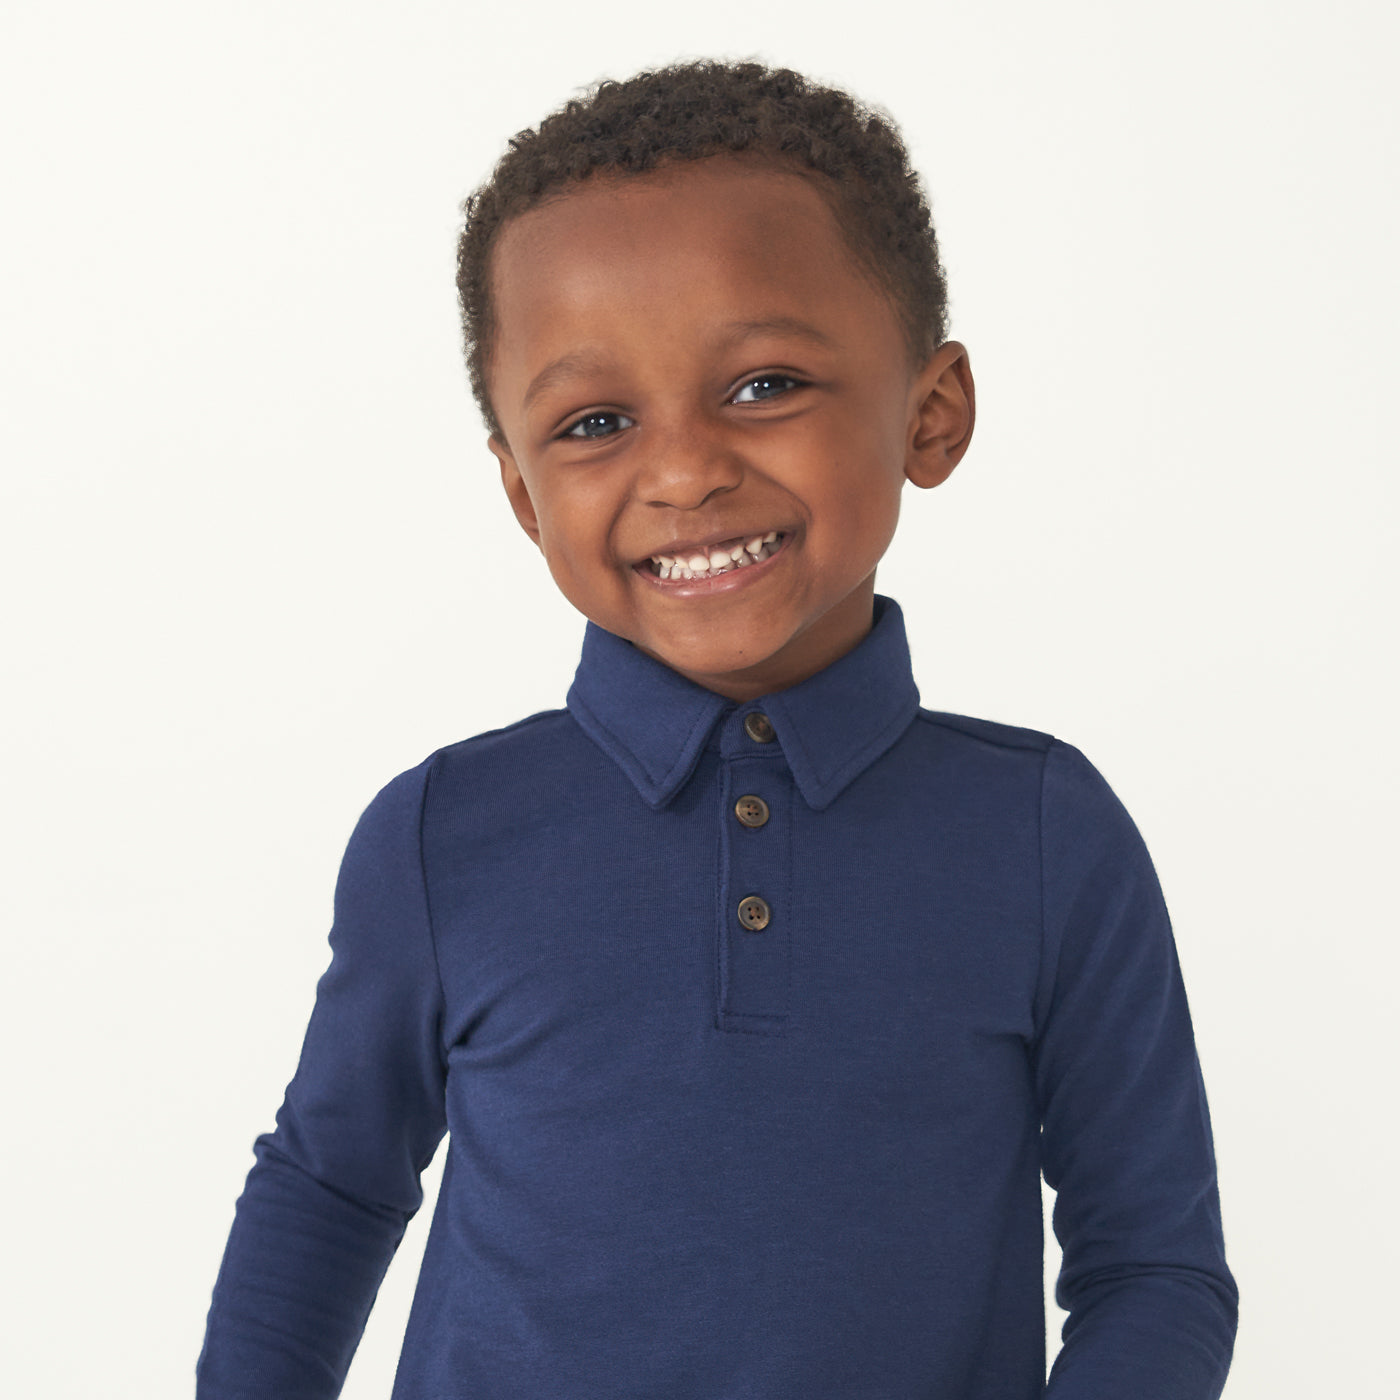 Alternate close up image of a child wearing a Classic Navy polo shirt